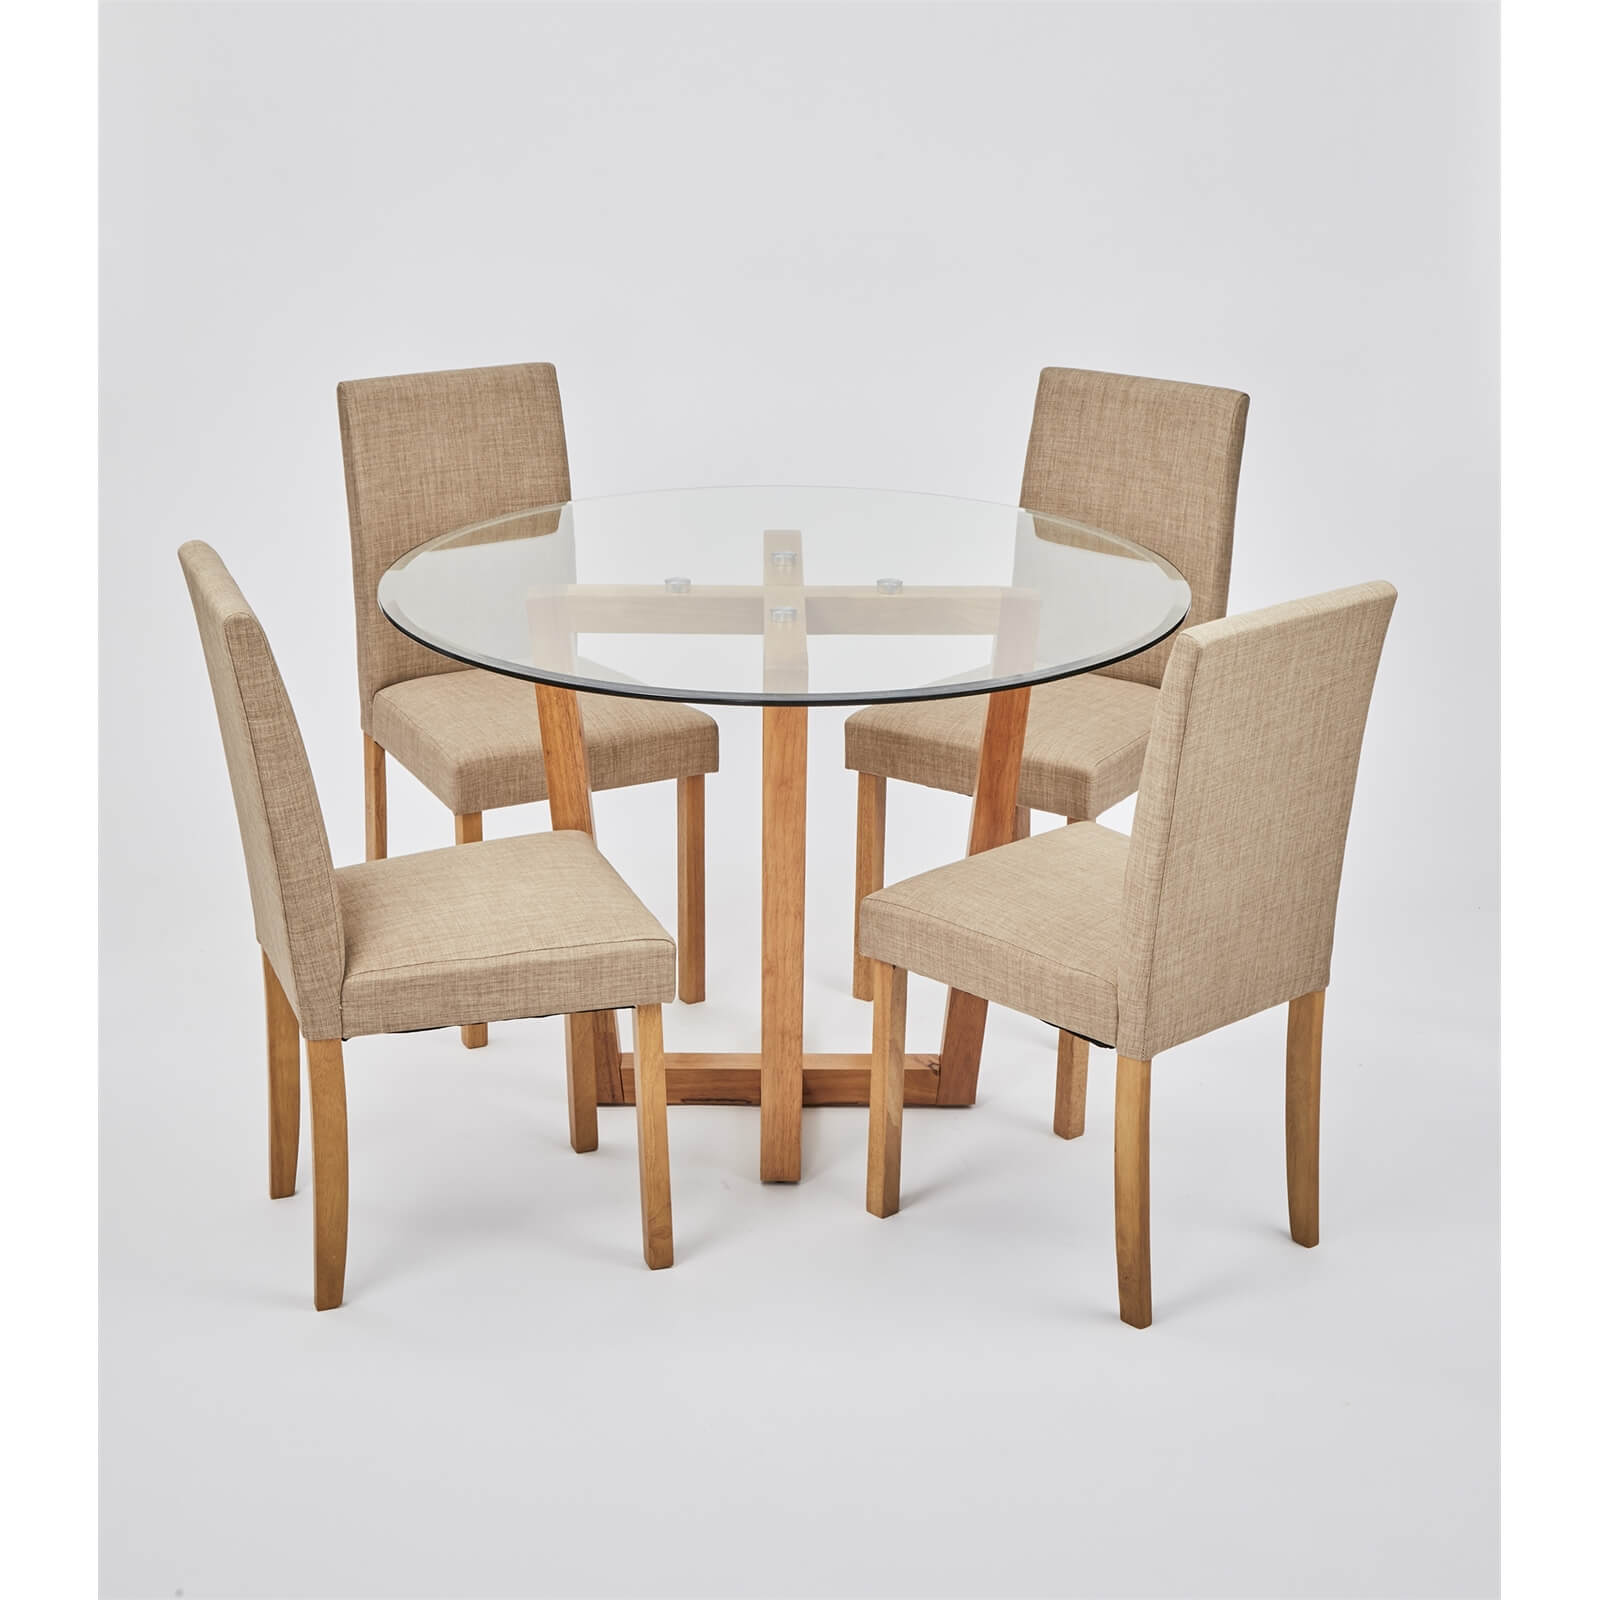 Valencia 4 Seater Dining Set - Anna Dining Chairs - Beige